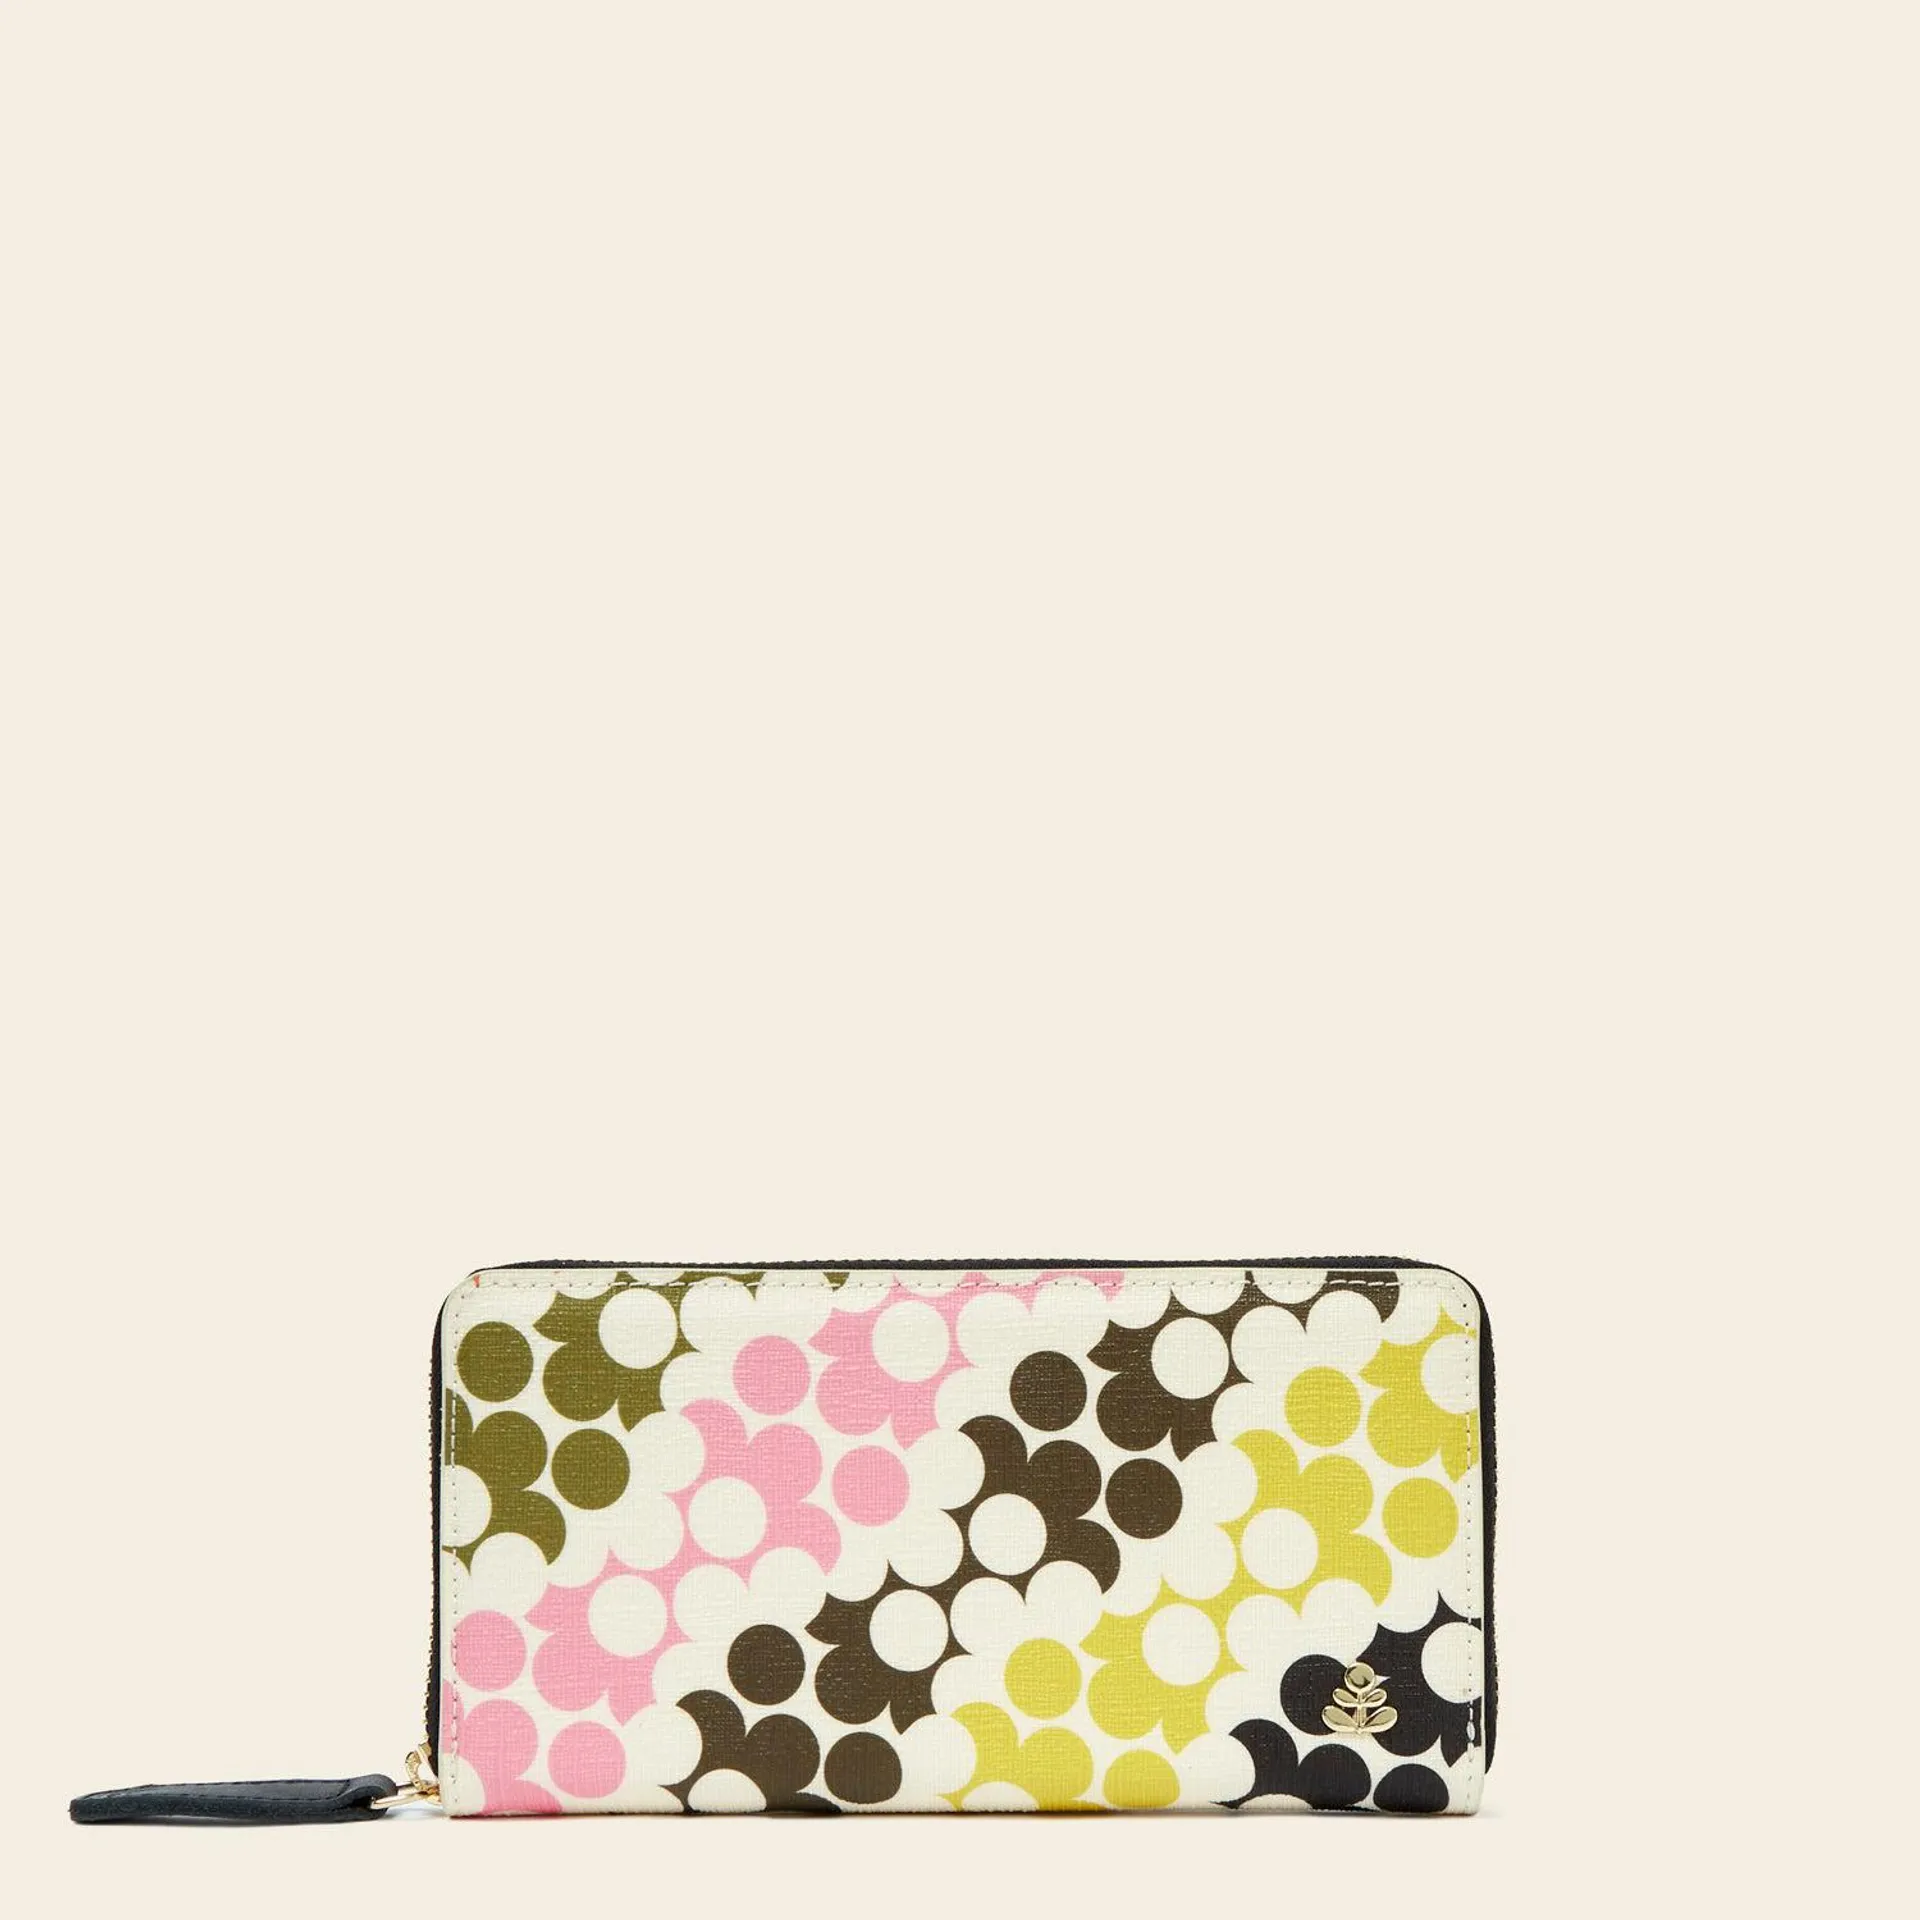 Forget Me Not City Wallet in Puzzle Flower Multi